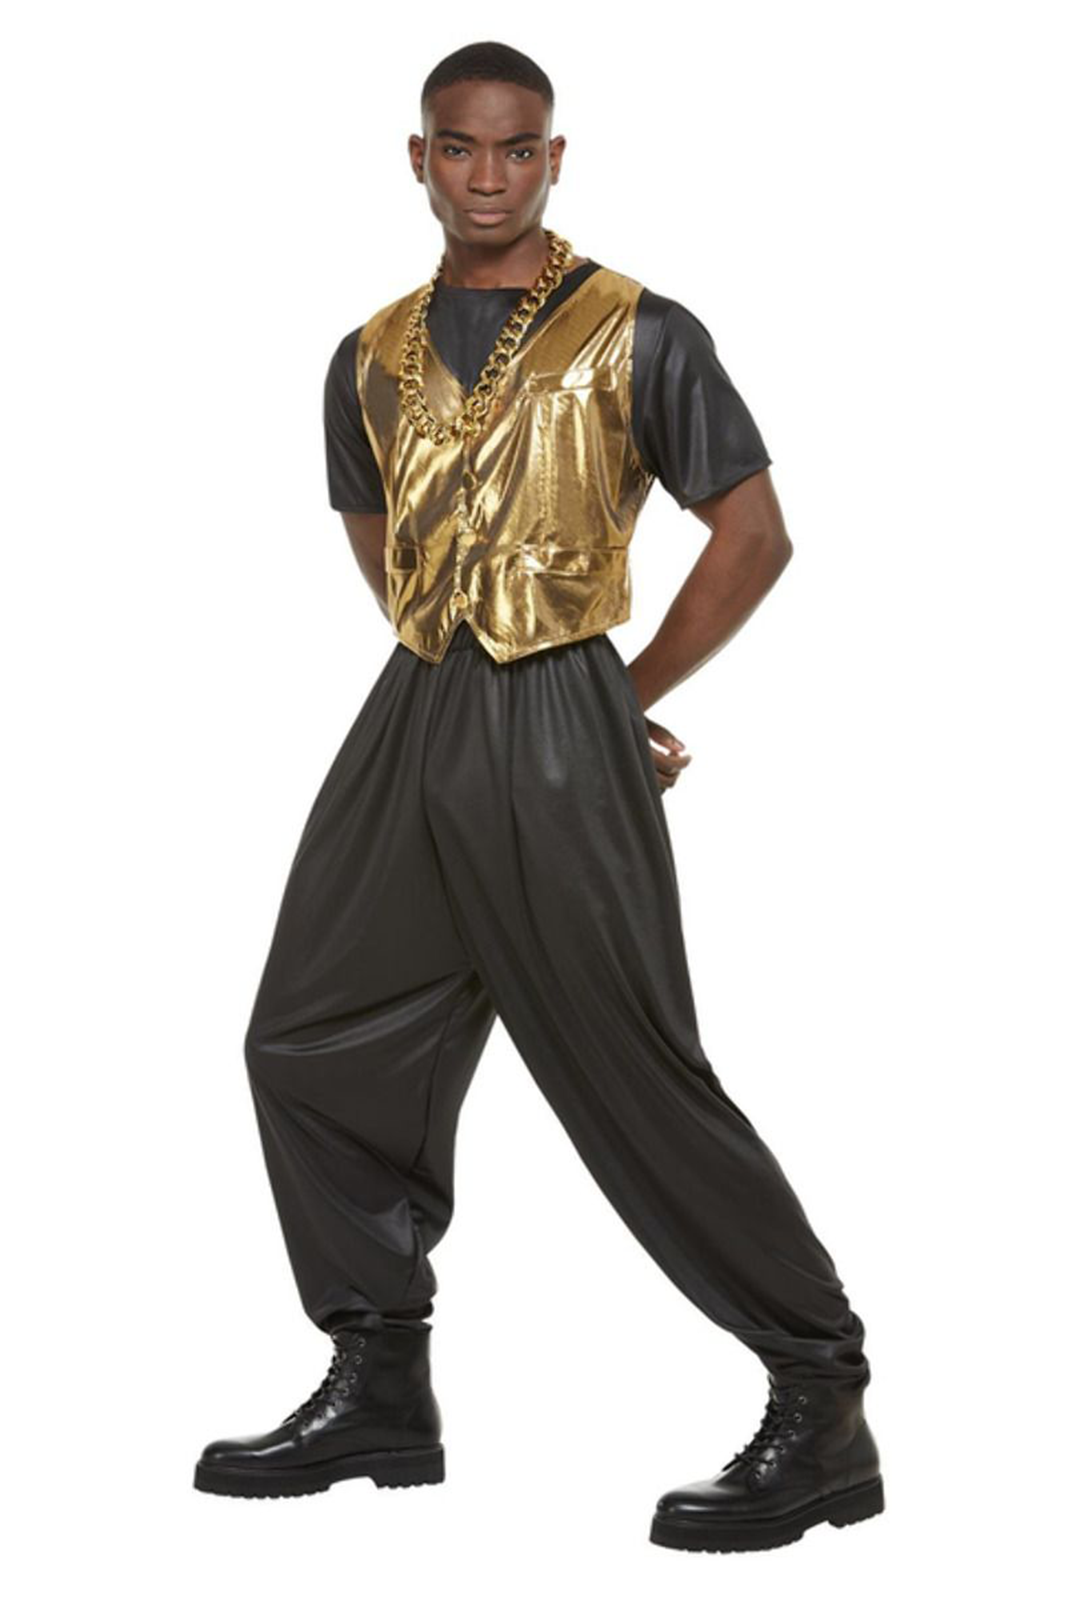 80s Hammer Time Costume